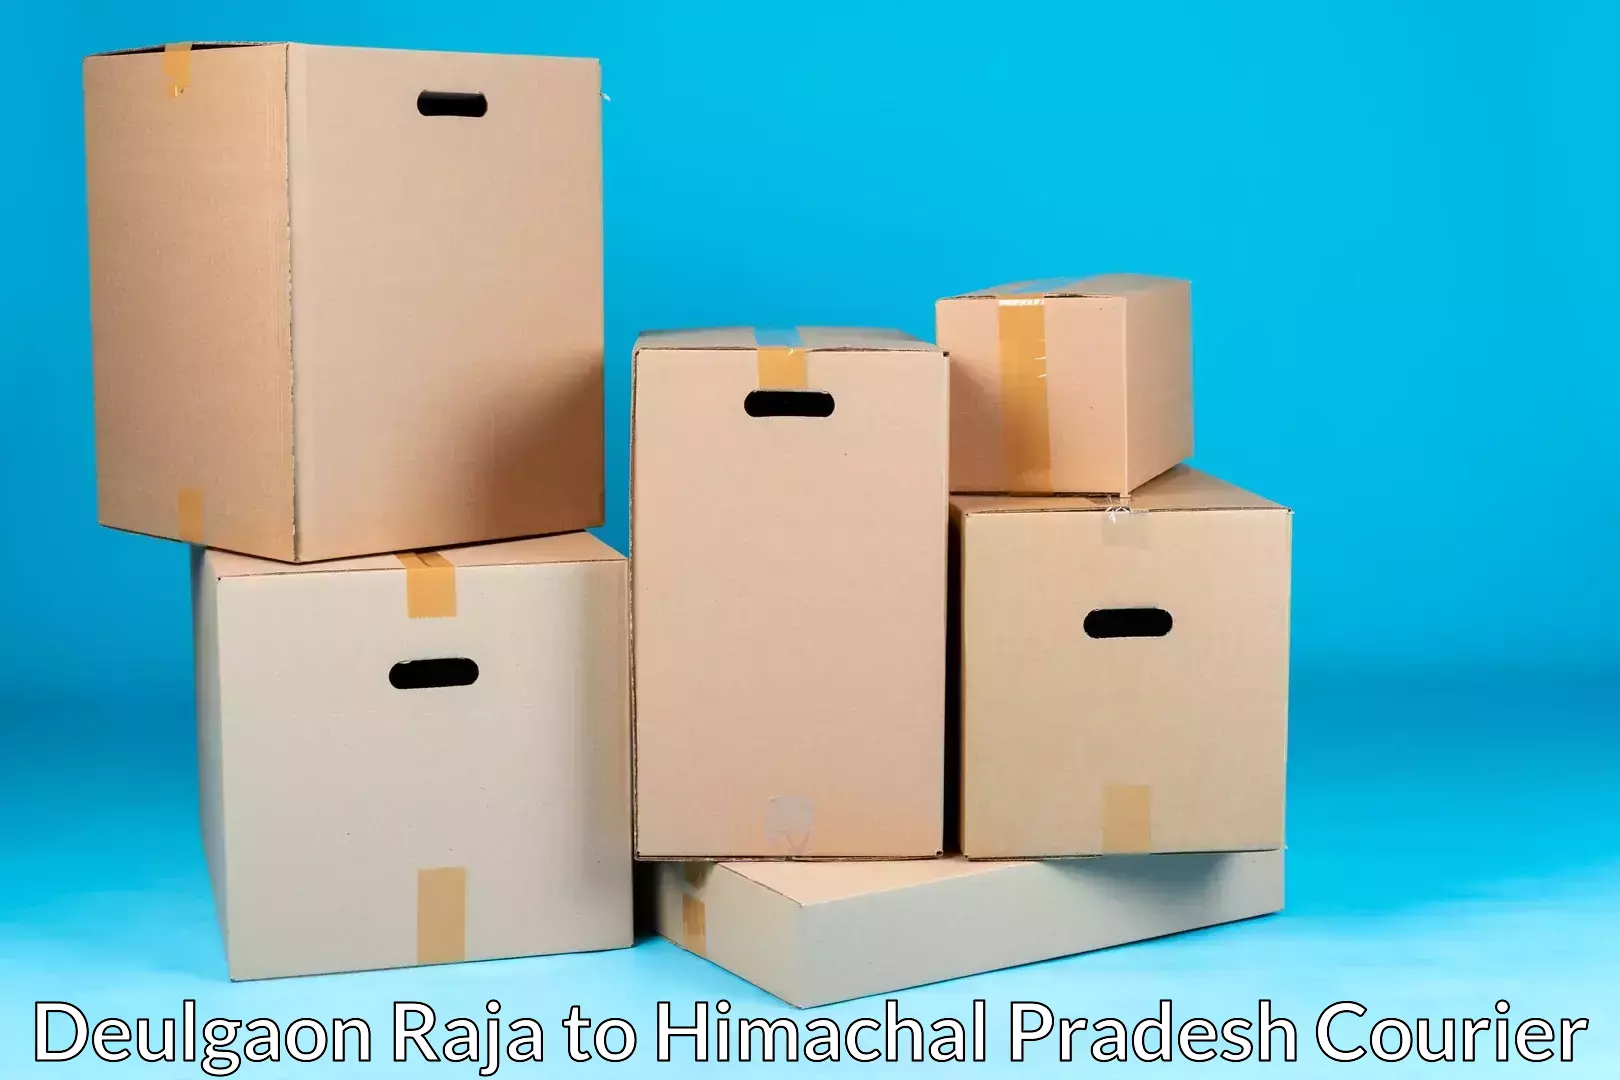 Affordable relocation services Deulgaon Raja to Waknaghat